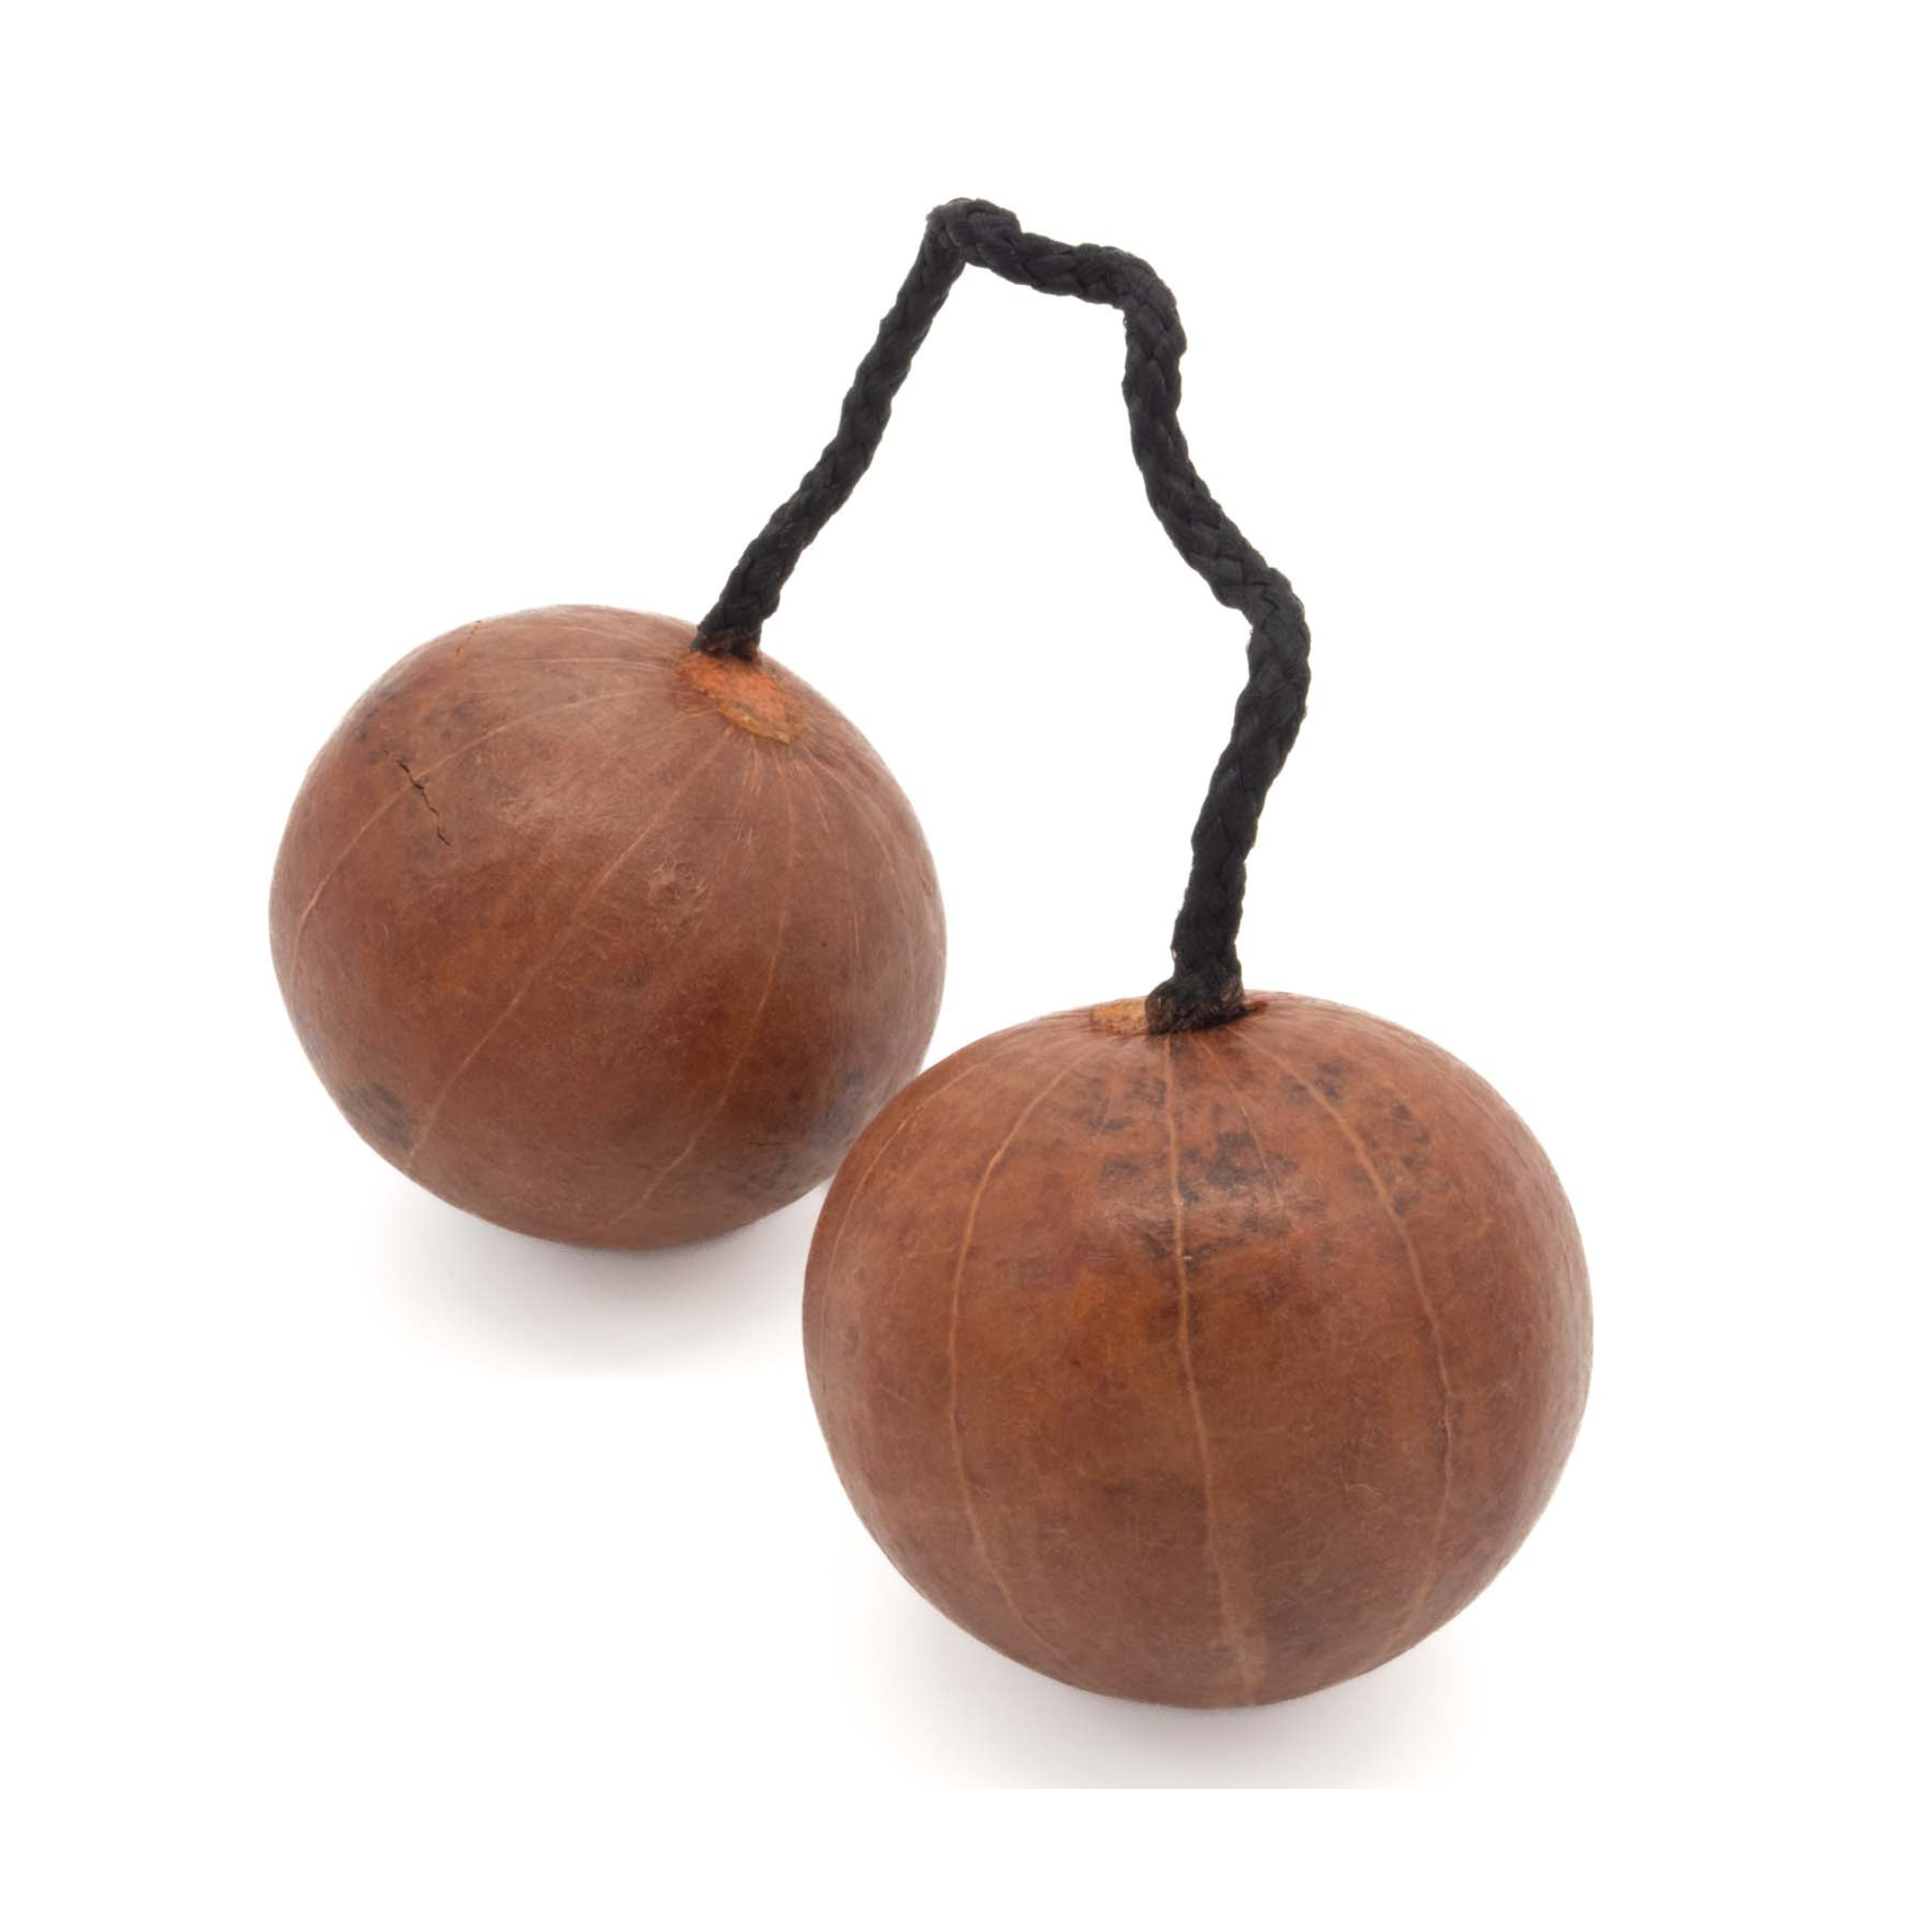 Gourd cas-cas shakers with natural grain